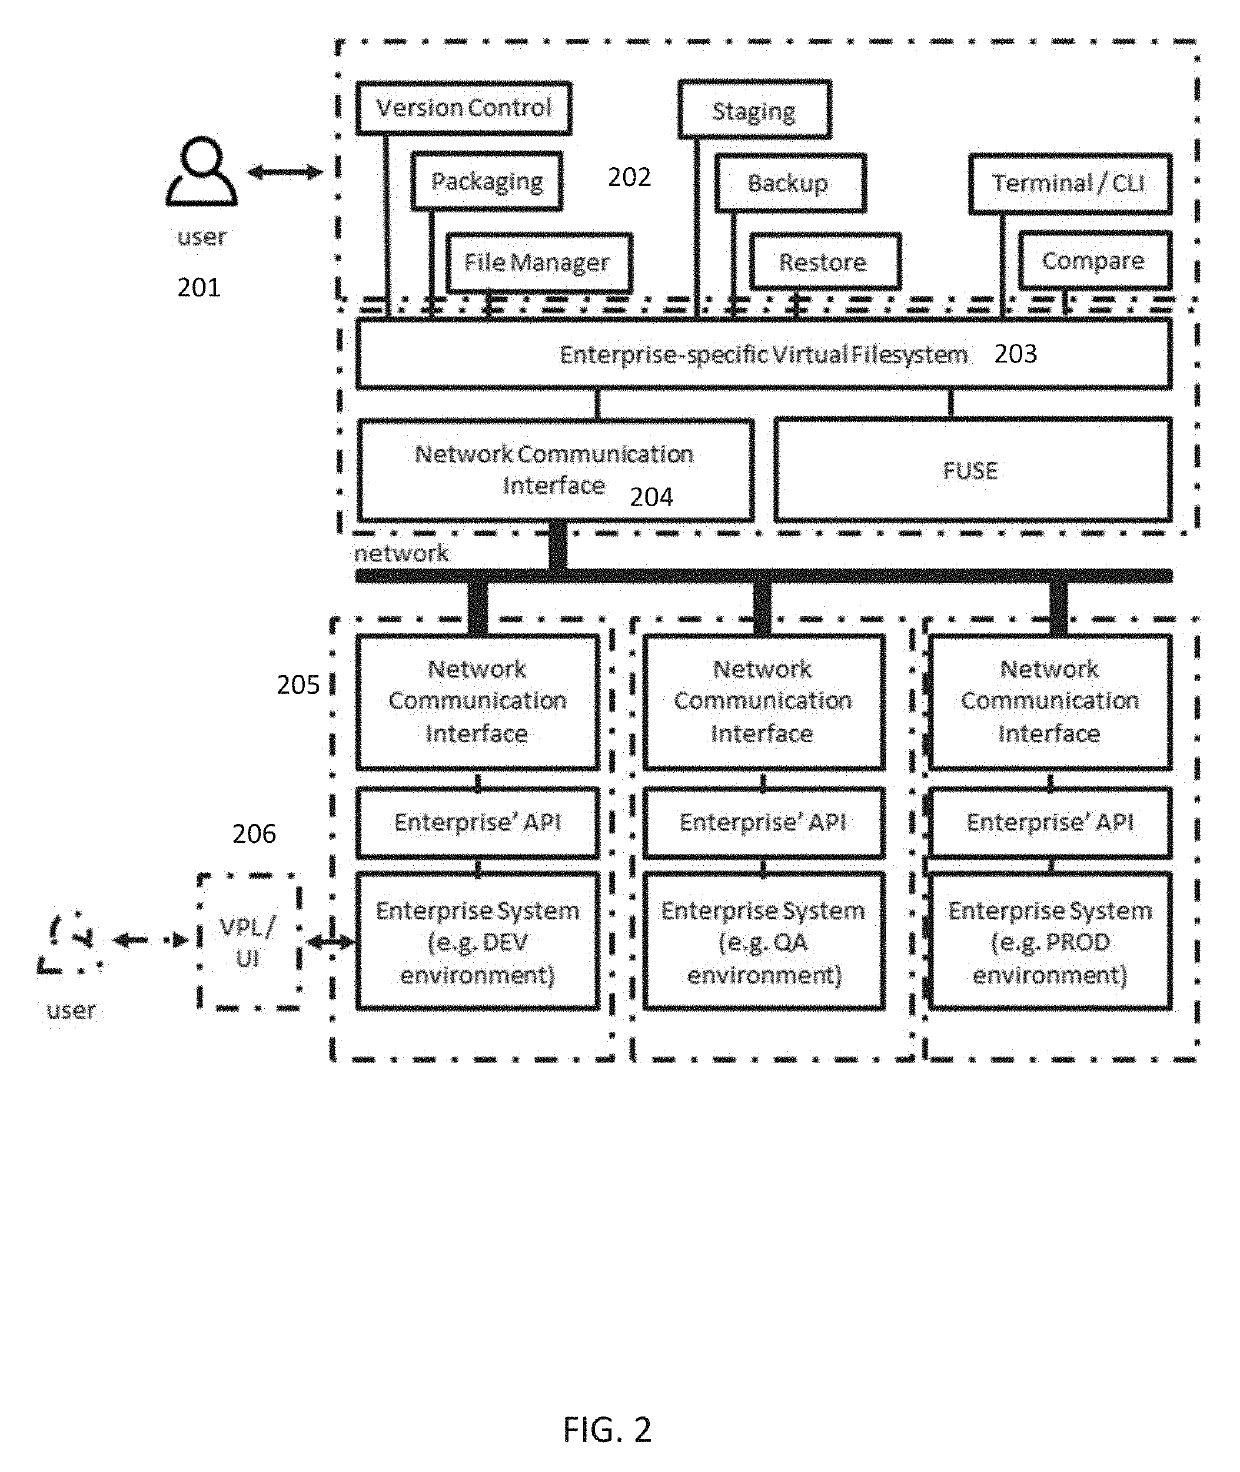 Apparatus and method for versioning, packaging, migrating and comparing artifacts of packaged and enterprise applications using virtual file systems